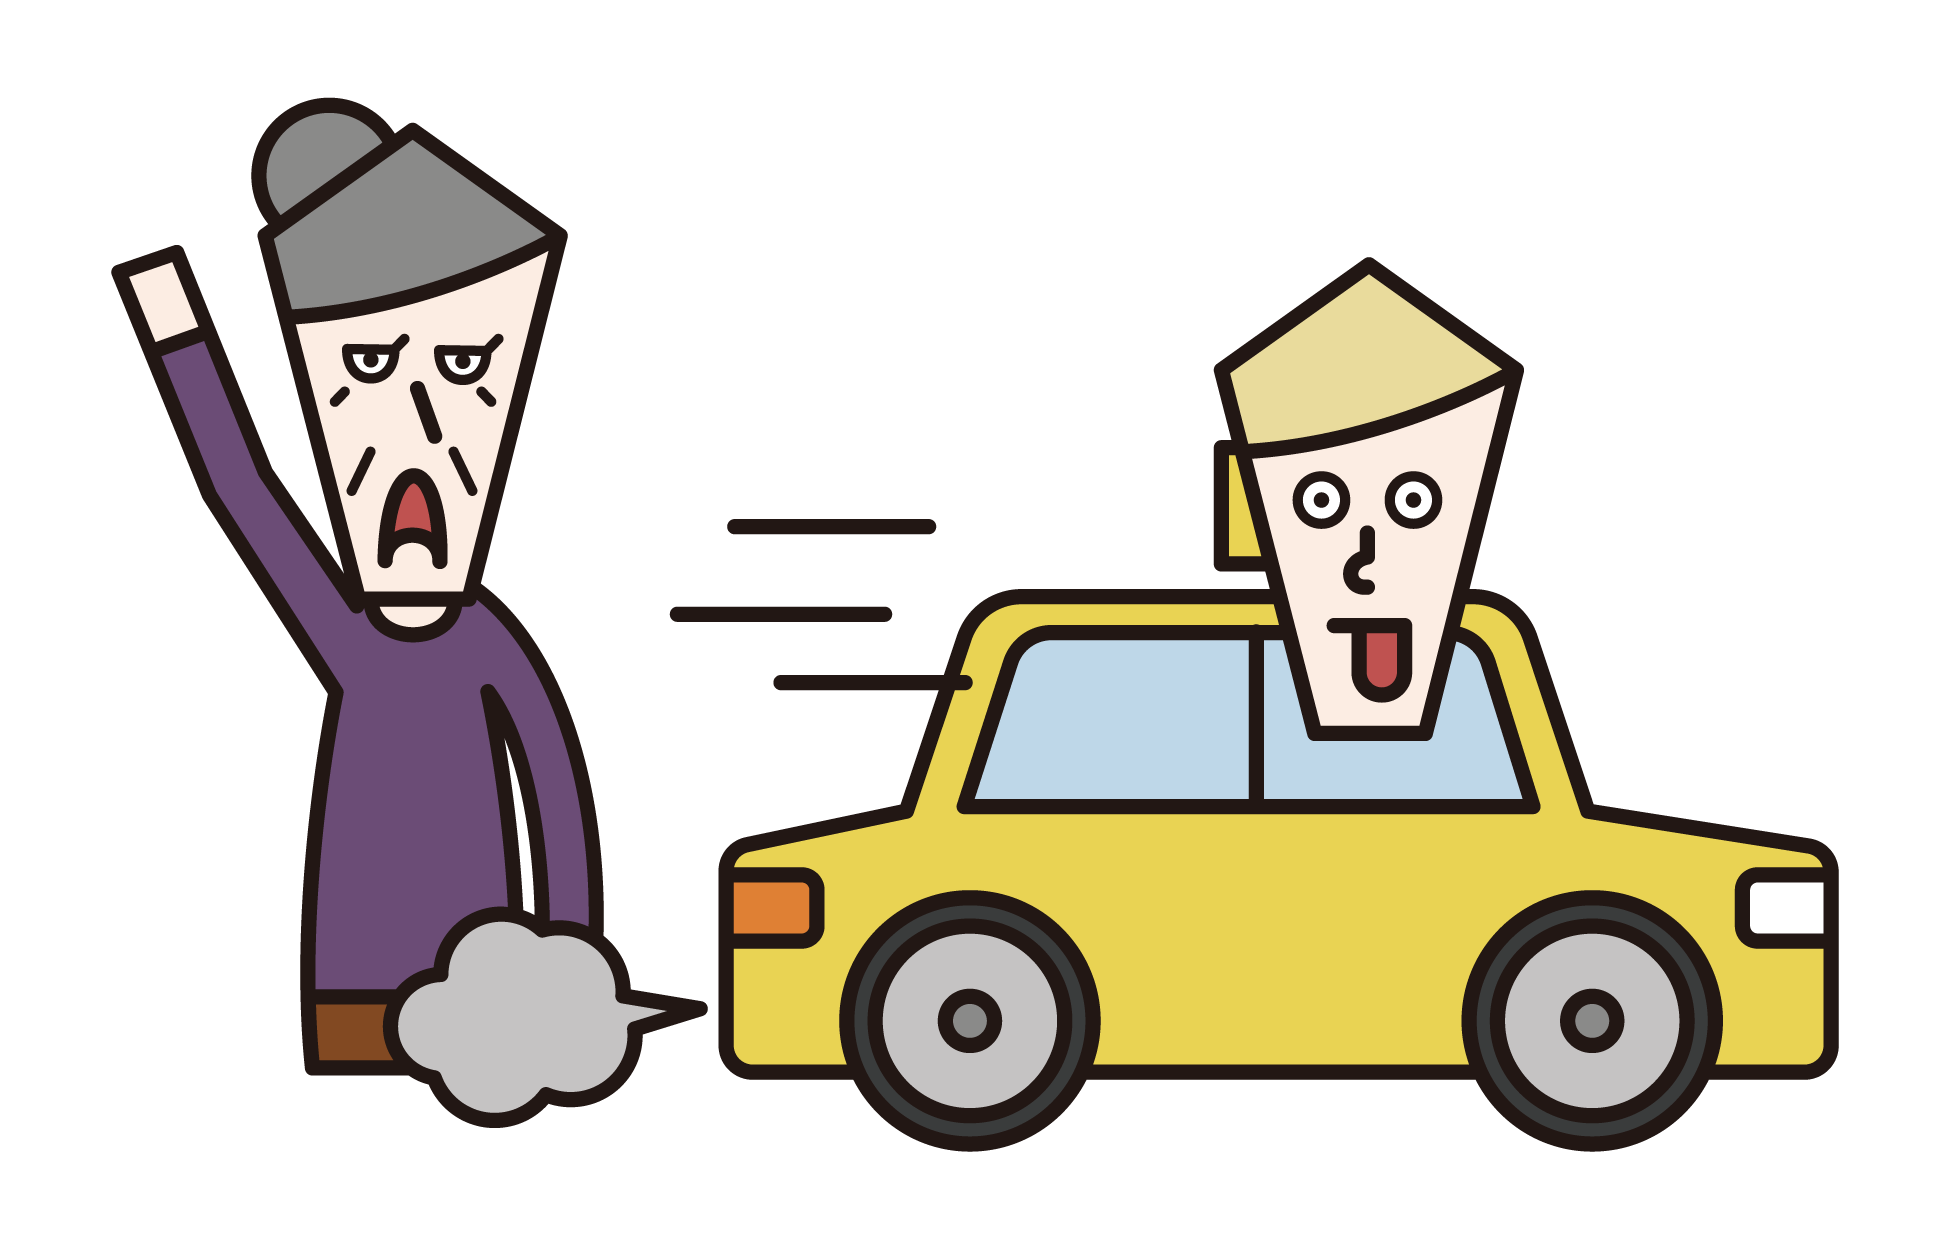 Illustration of a person (grandmother) who failed to catch a taxi